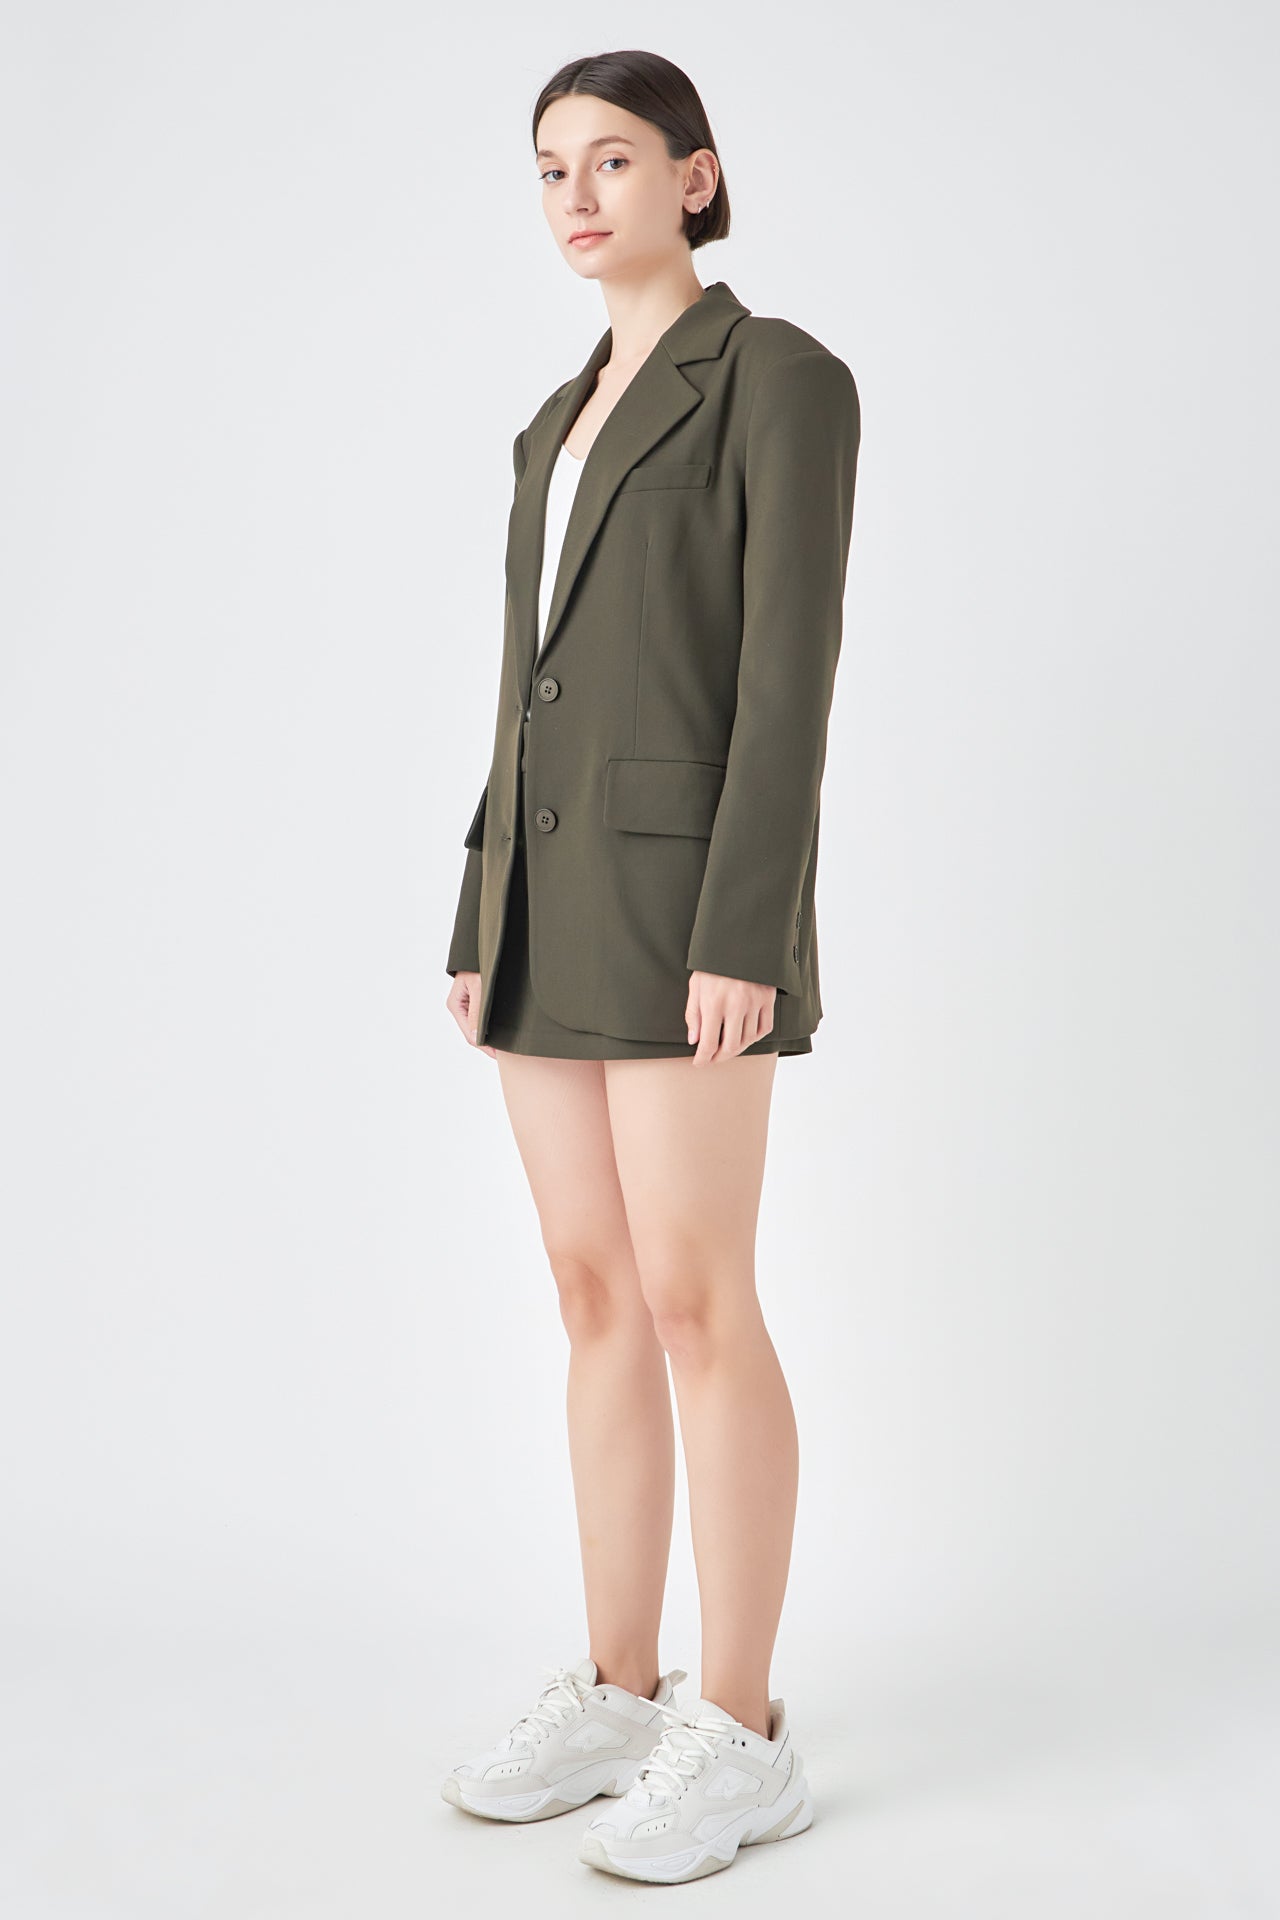 GREY LAB - Oversized Notched Collar Blazer - BLAZERS available at Objectrare